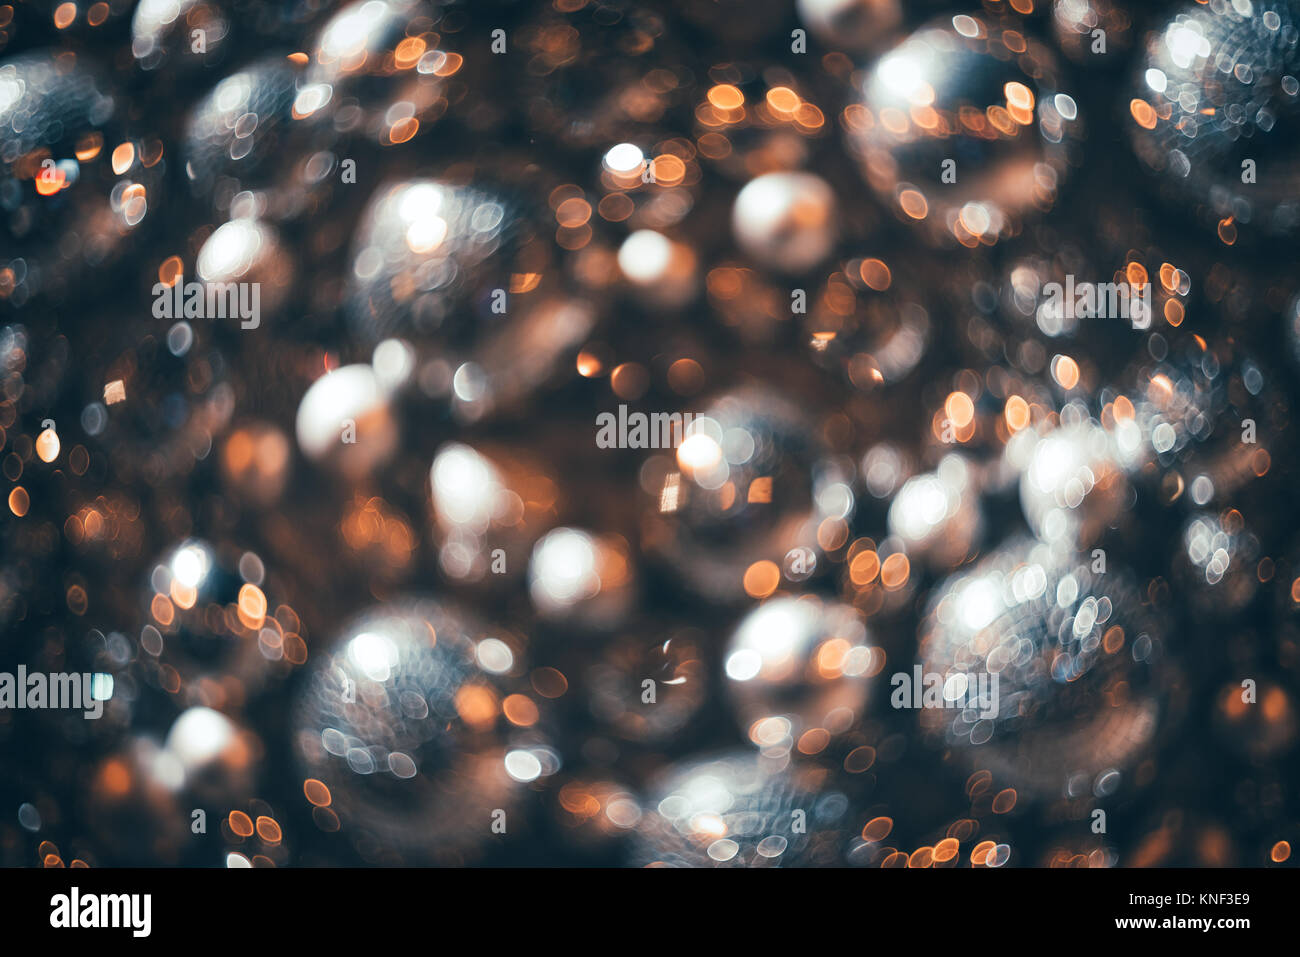 Bokeh. New Year bokeh background. Abstract background with colorful bokeh. Defocused lights. Background for Christmas cards. Beautiful blurred christm Stock Photo